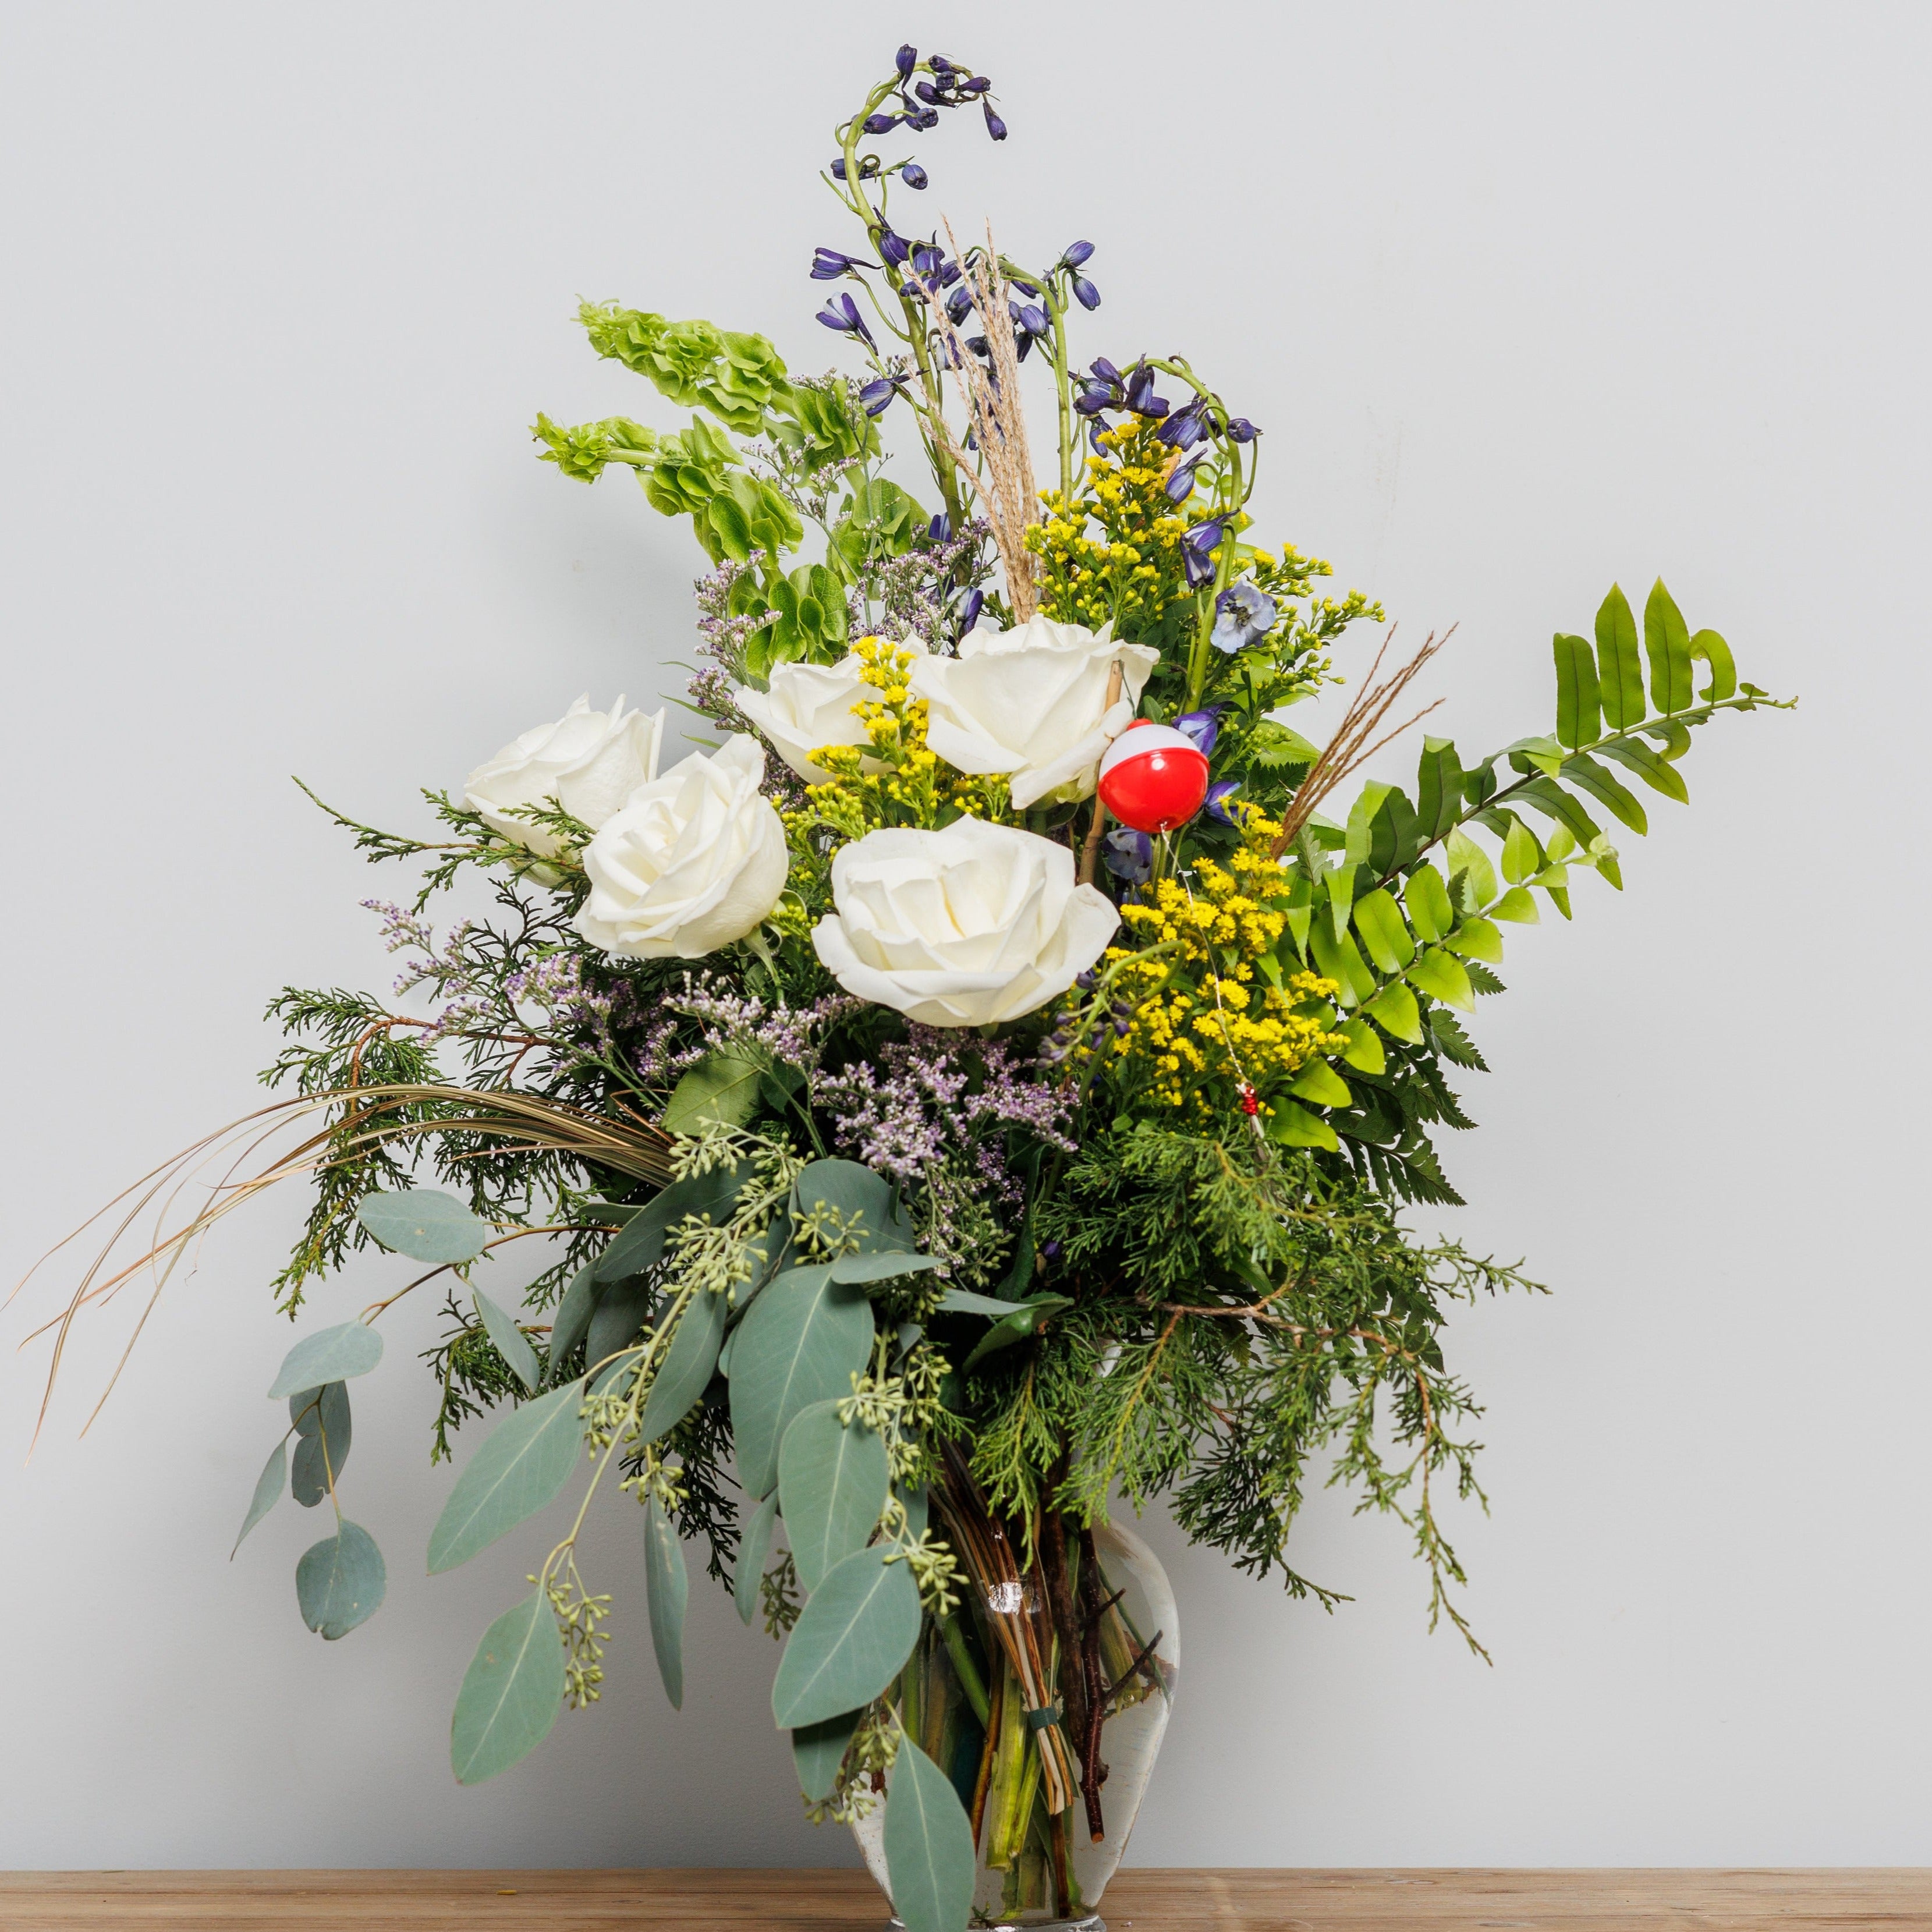 A vase arrangement with lots of greenery and white roses with a fishing accessory.